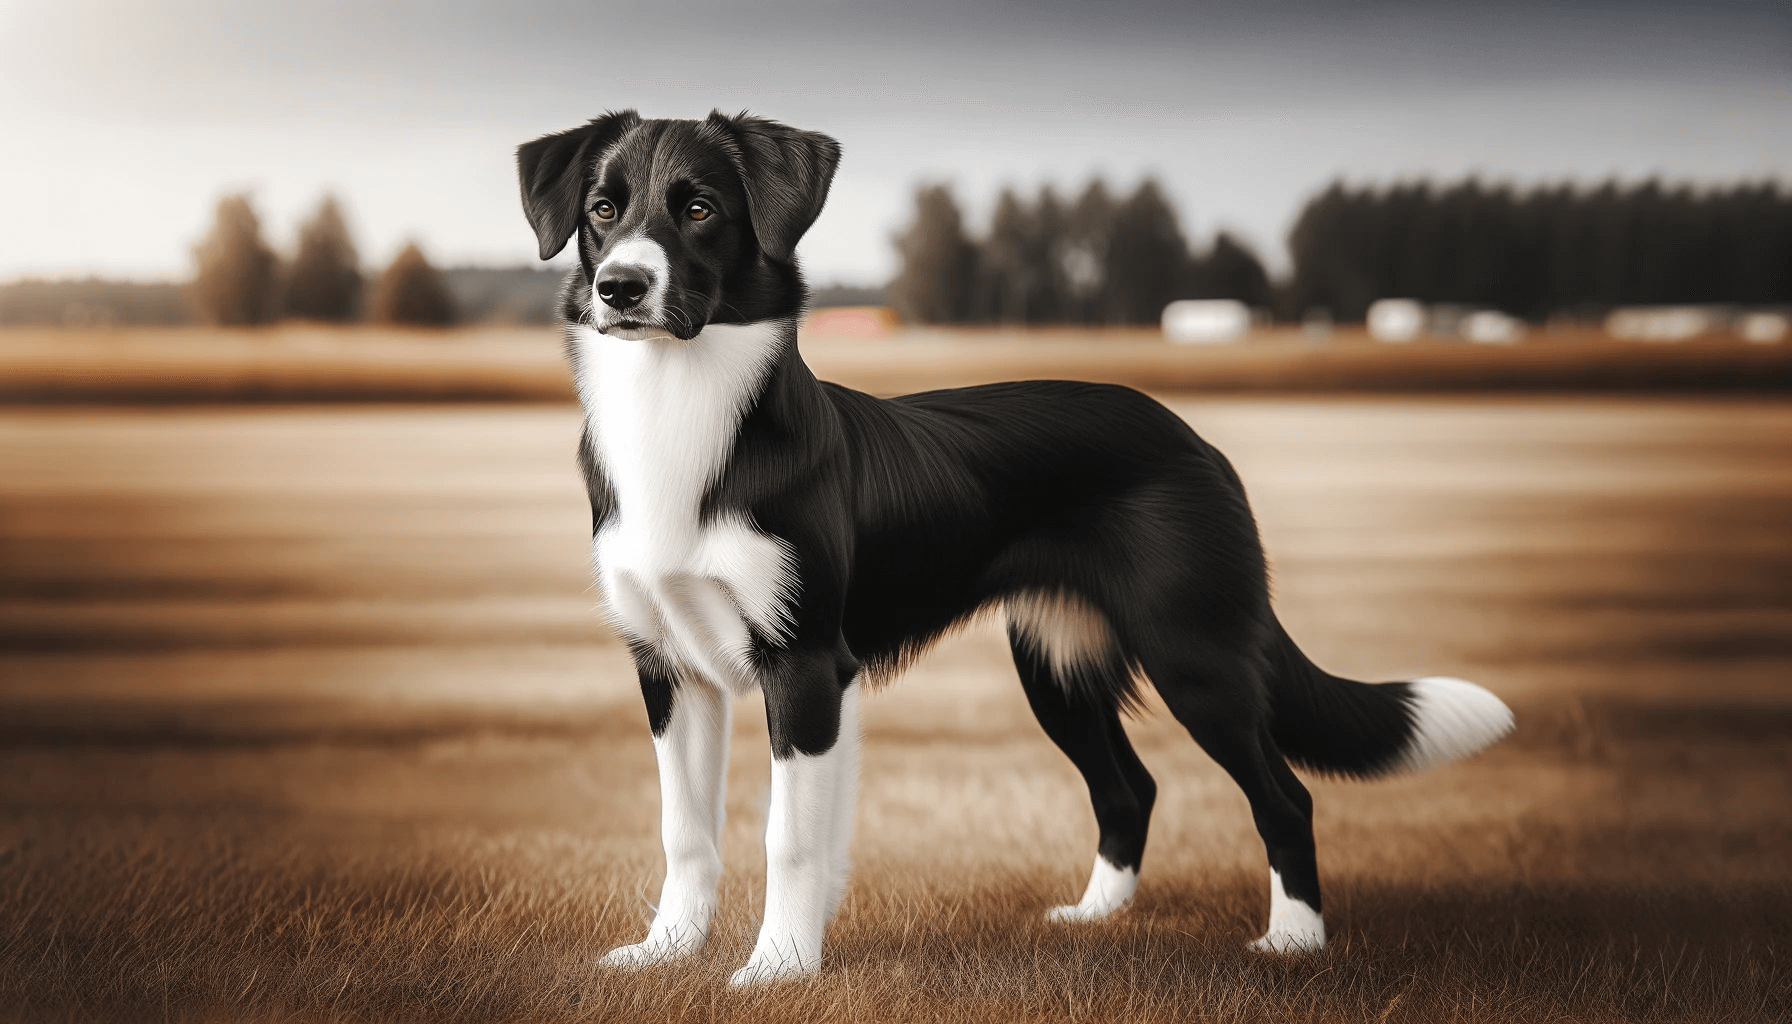 Sleek athletic Borador Border Collie Lab Mix with a black and white coat standing alert in an outdoor setting.